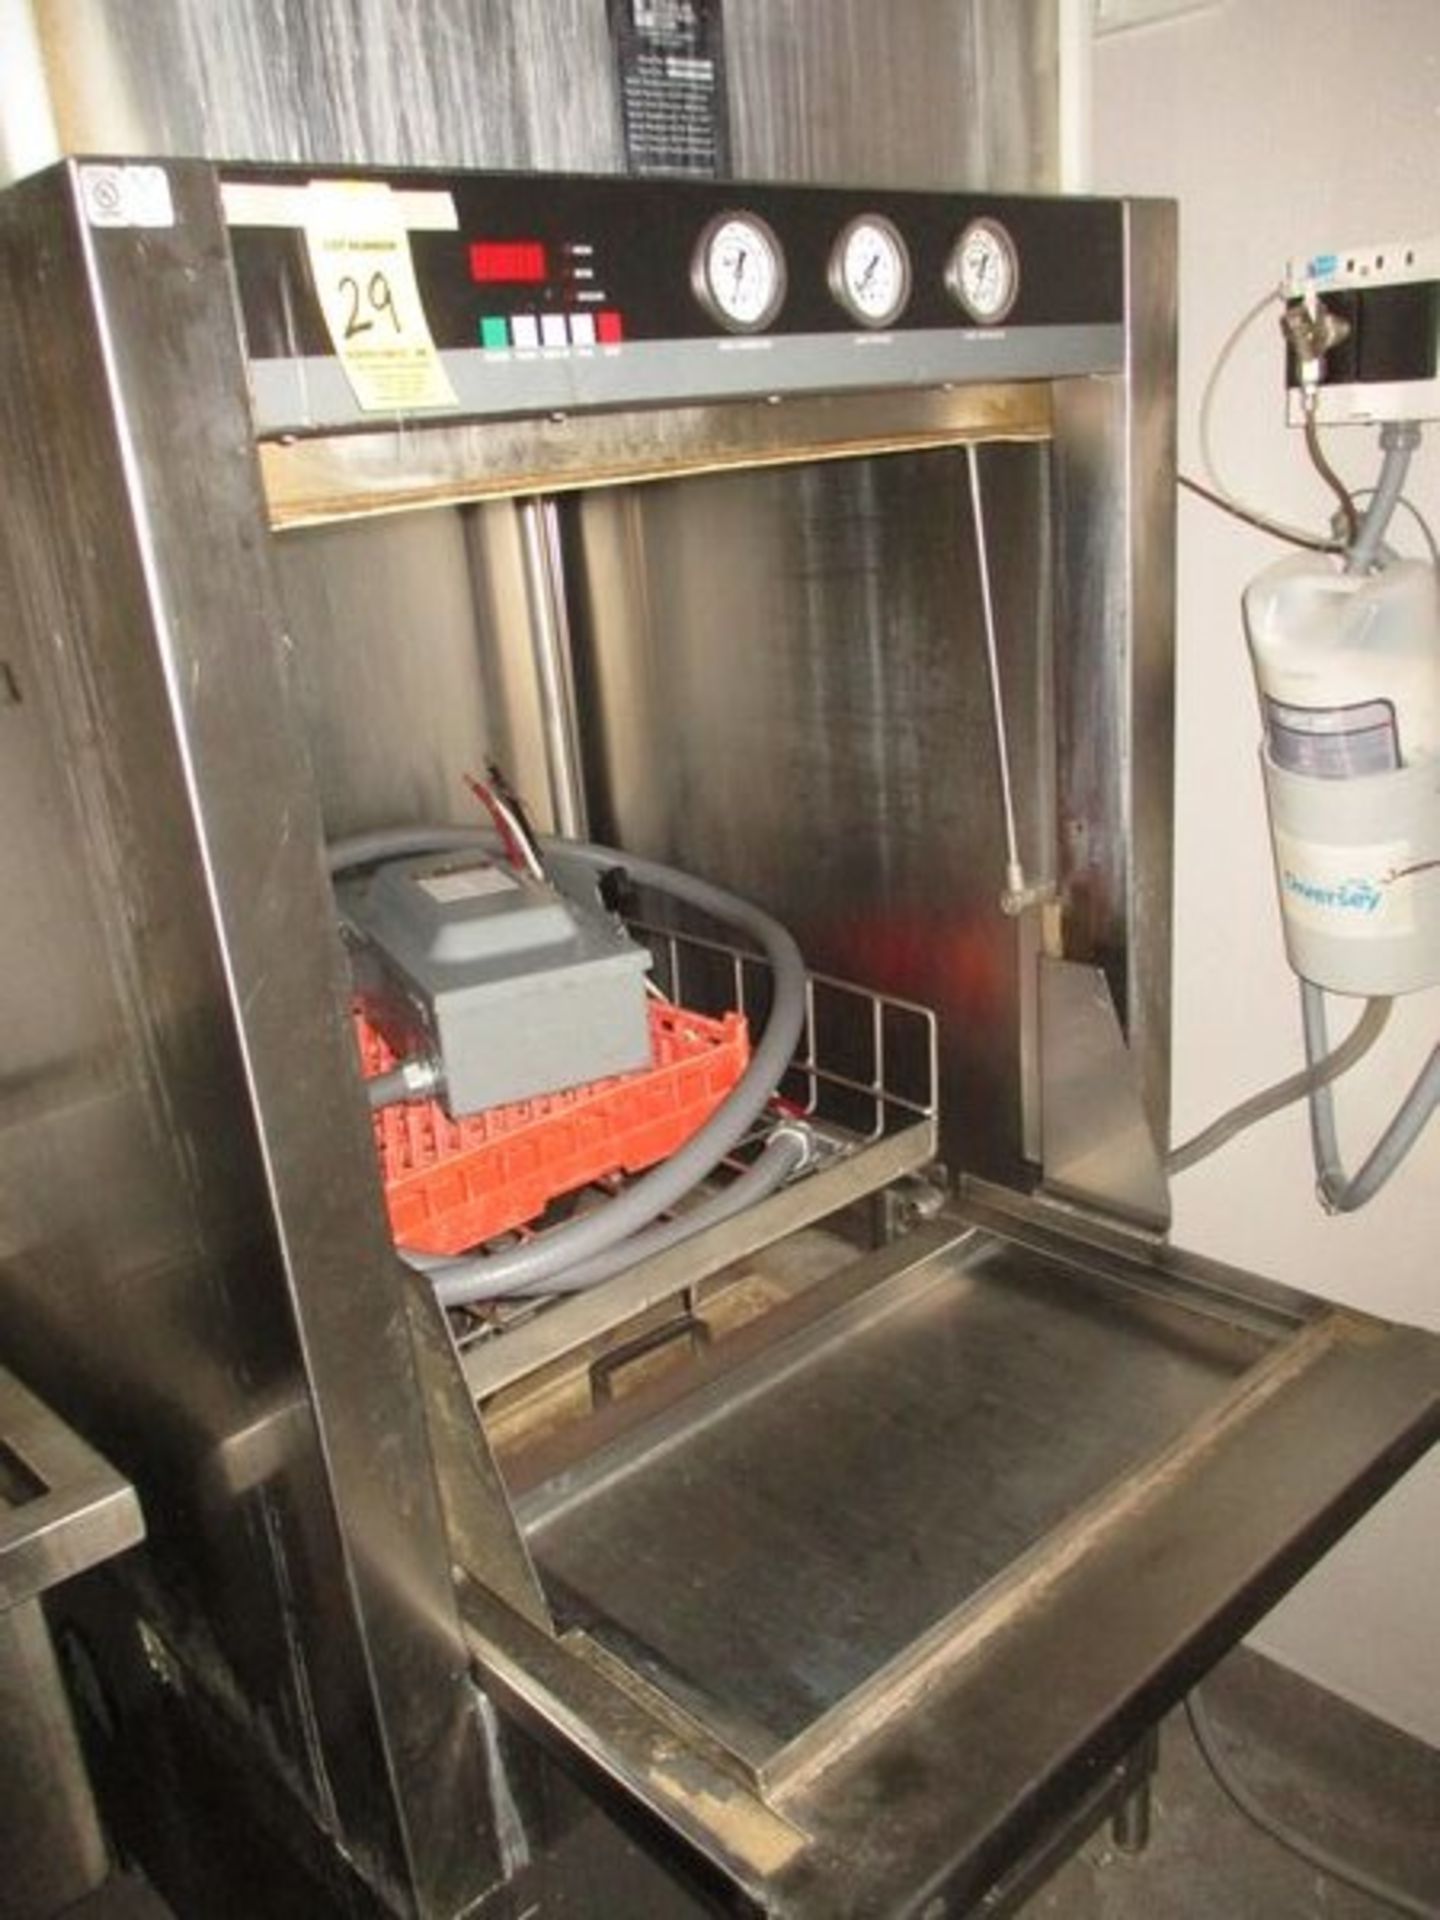 Douglas SD-10 Dishwasher, Gas (Asset Located in Brighton, MA) - Image 3 of 3